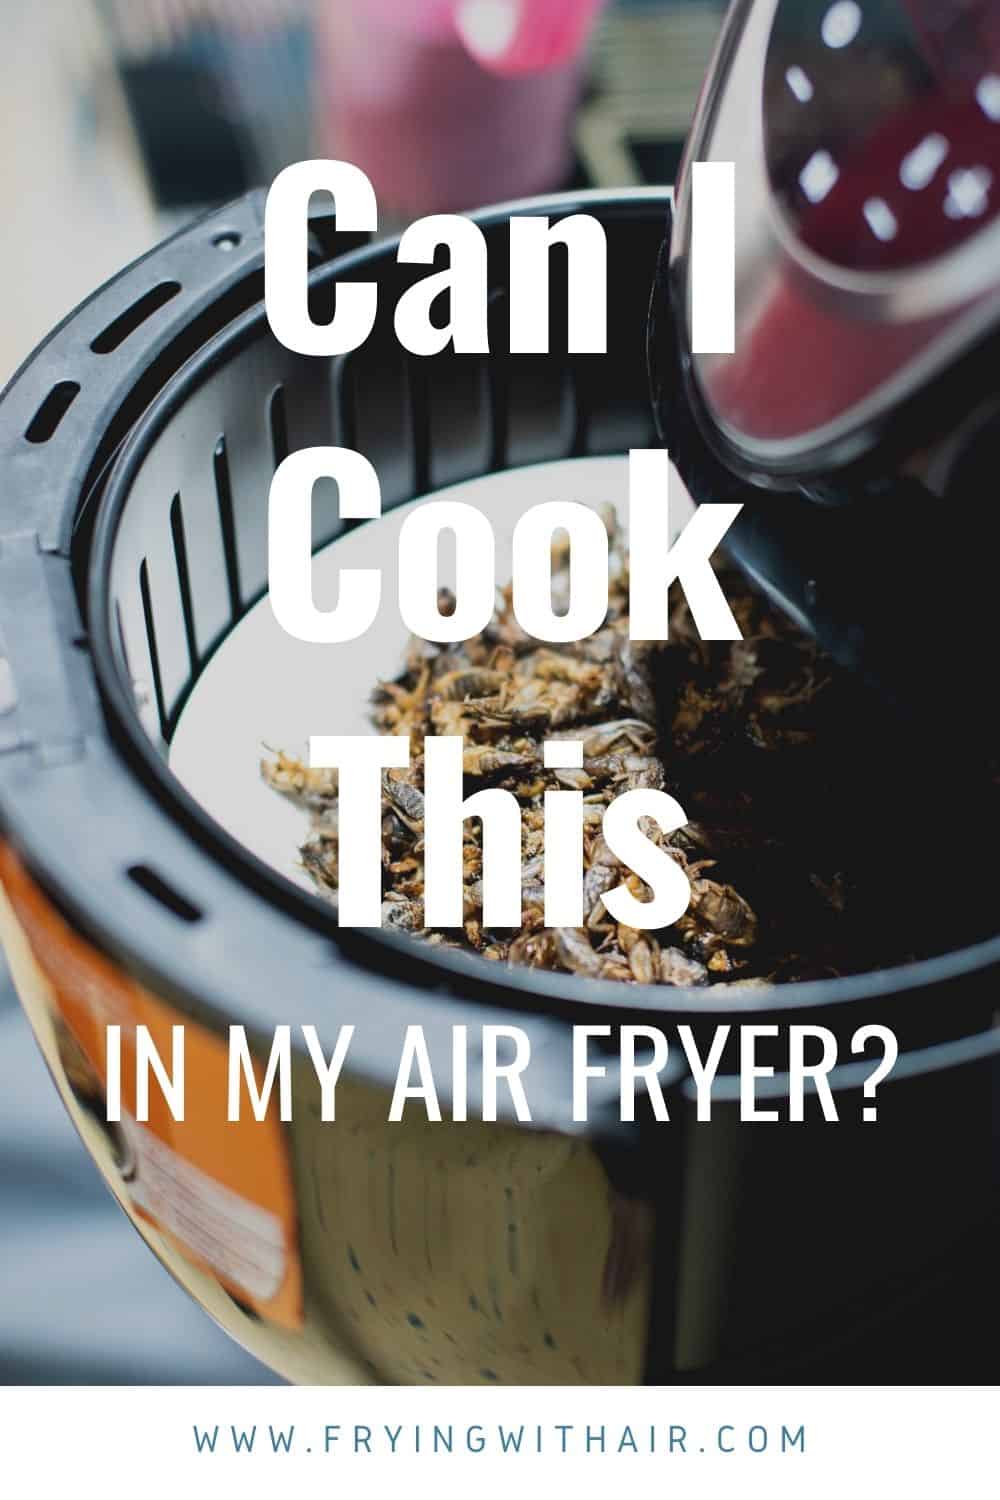 What Can You Not Cook In An Air Fryer (1)